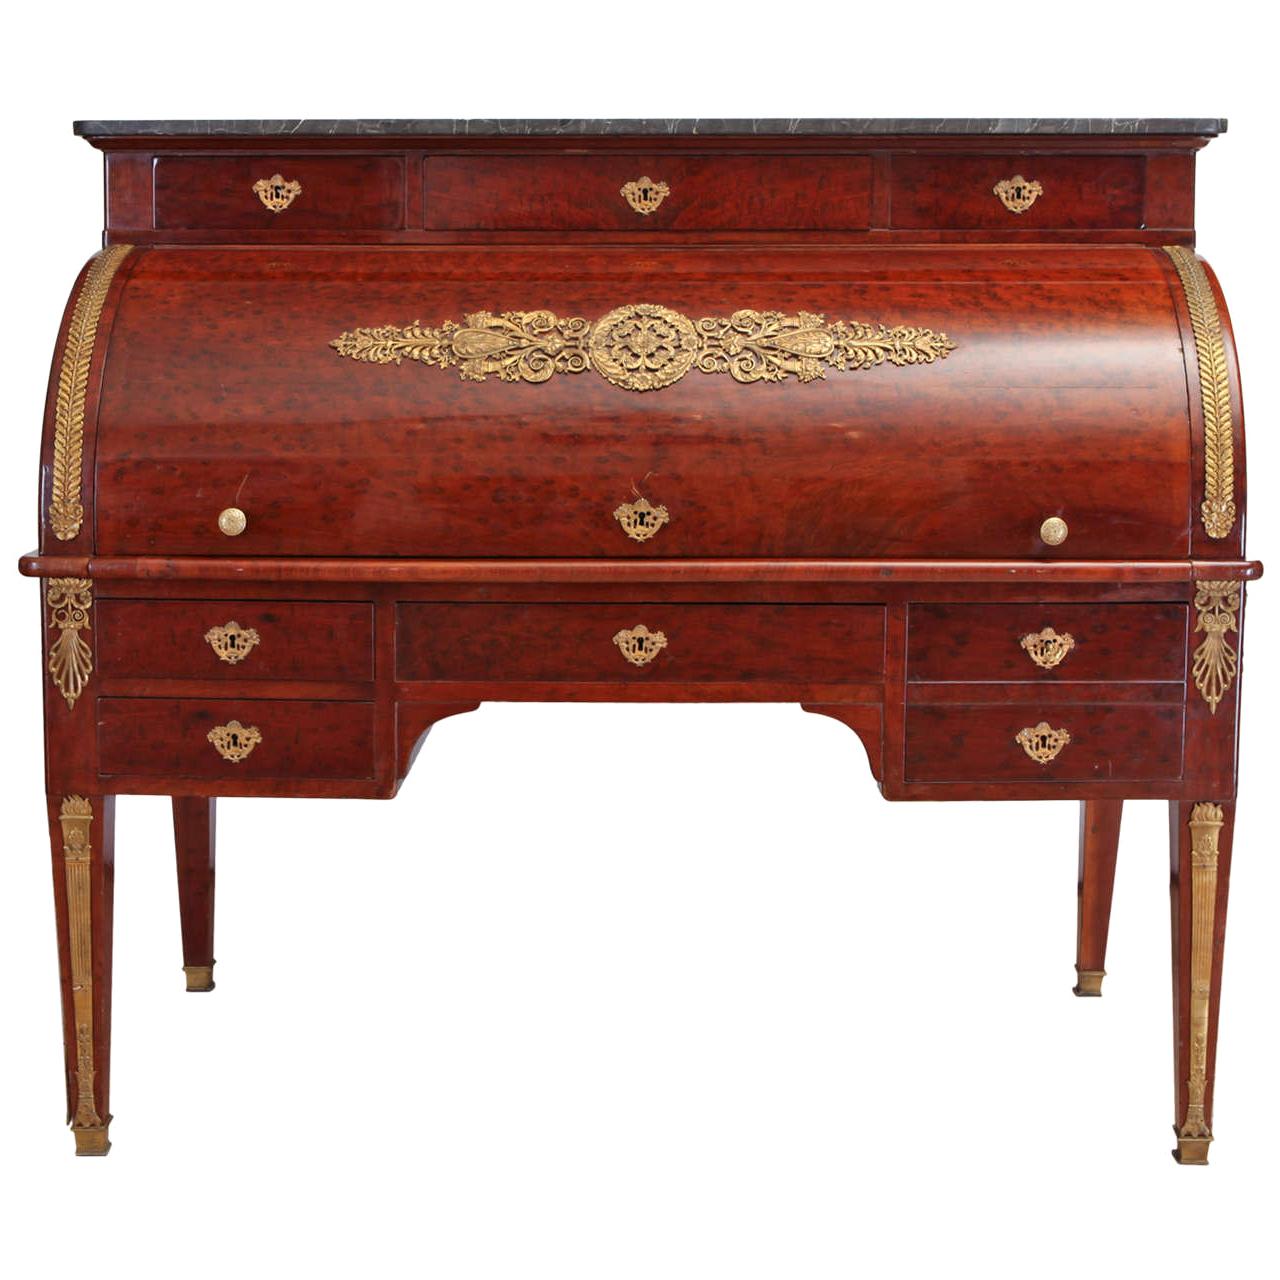 French Empire Mahogany Bureau à Cylindre Writing Table, circa 1810 For Sale